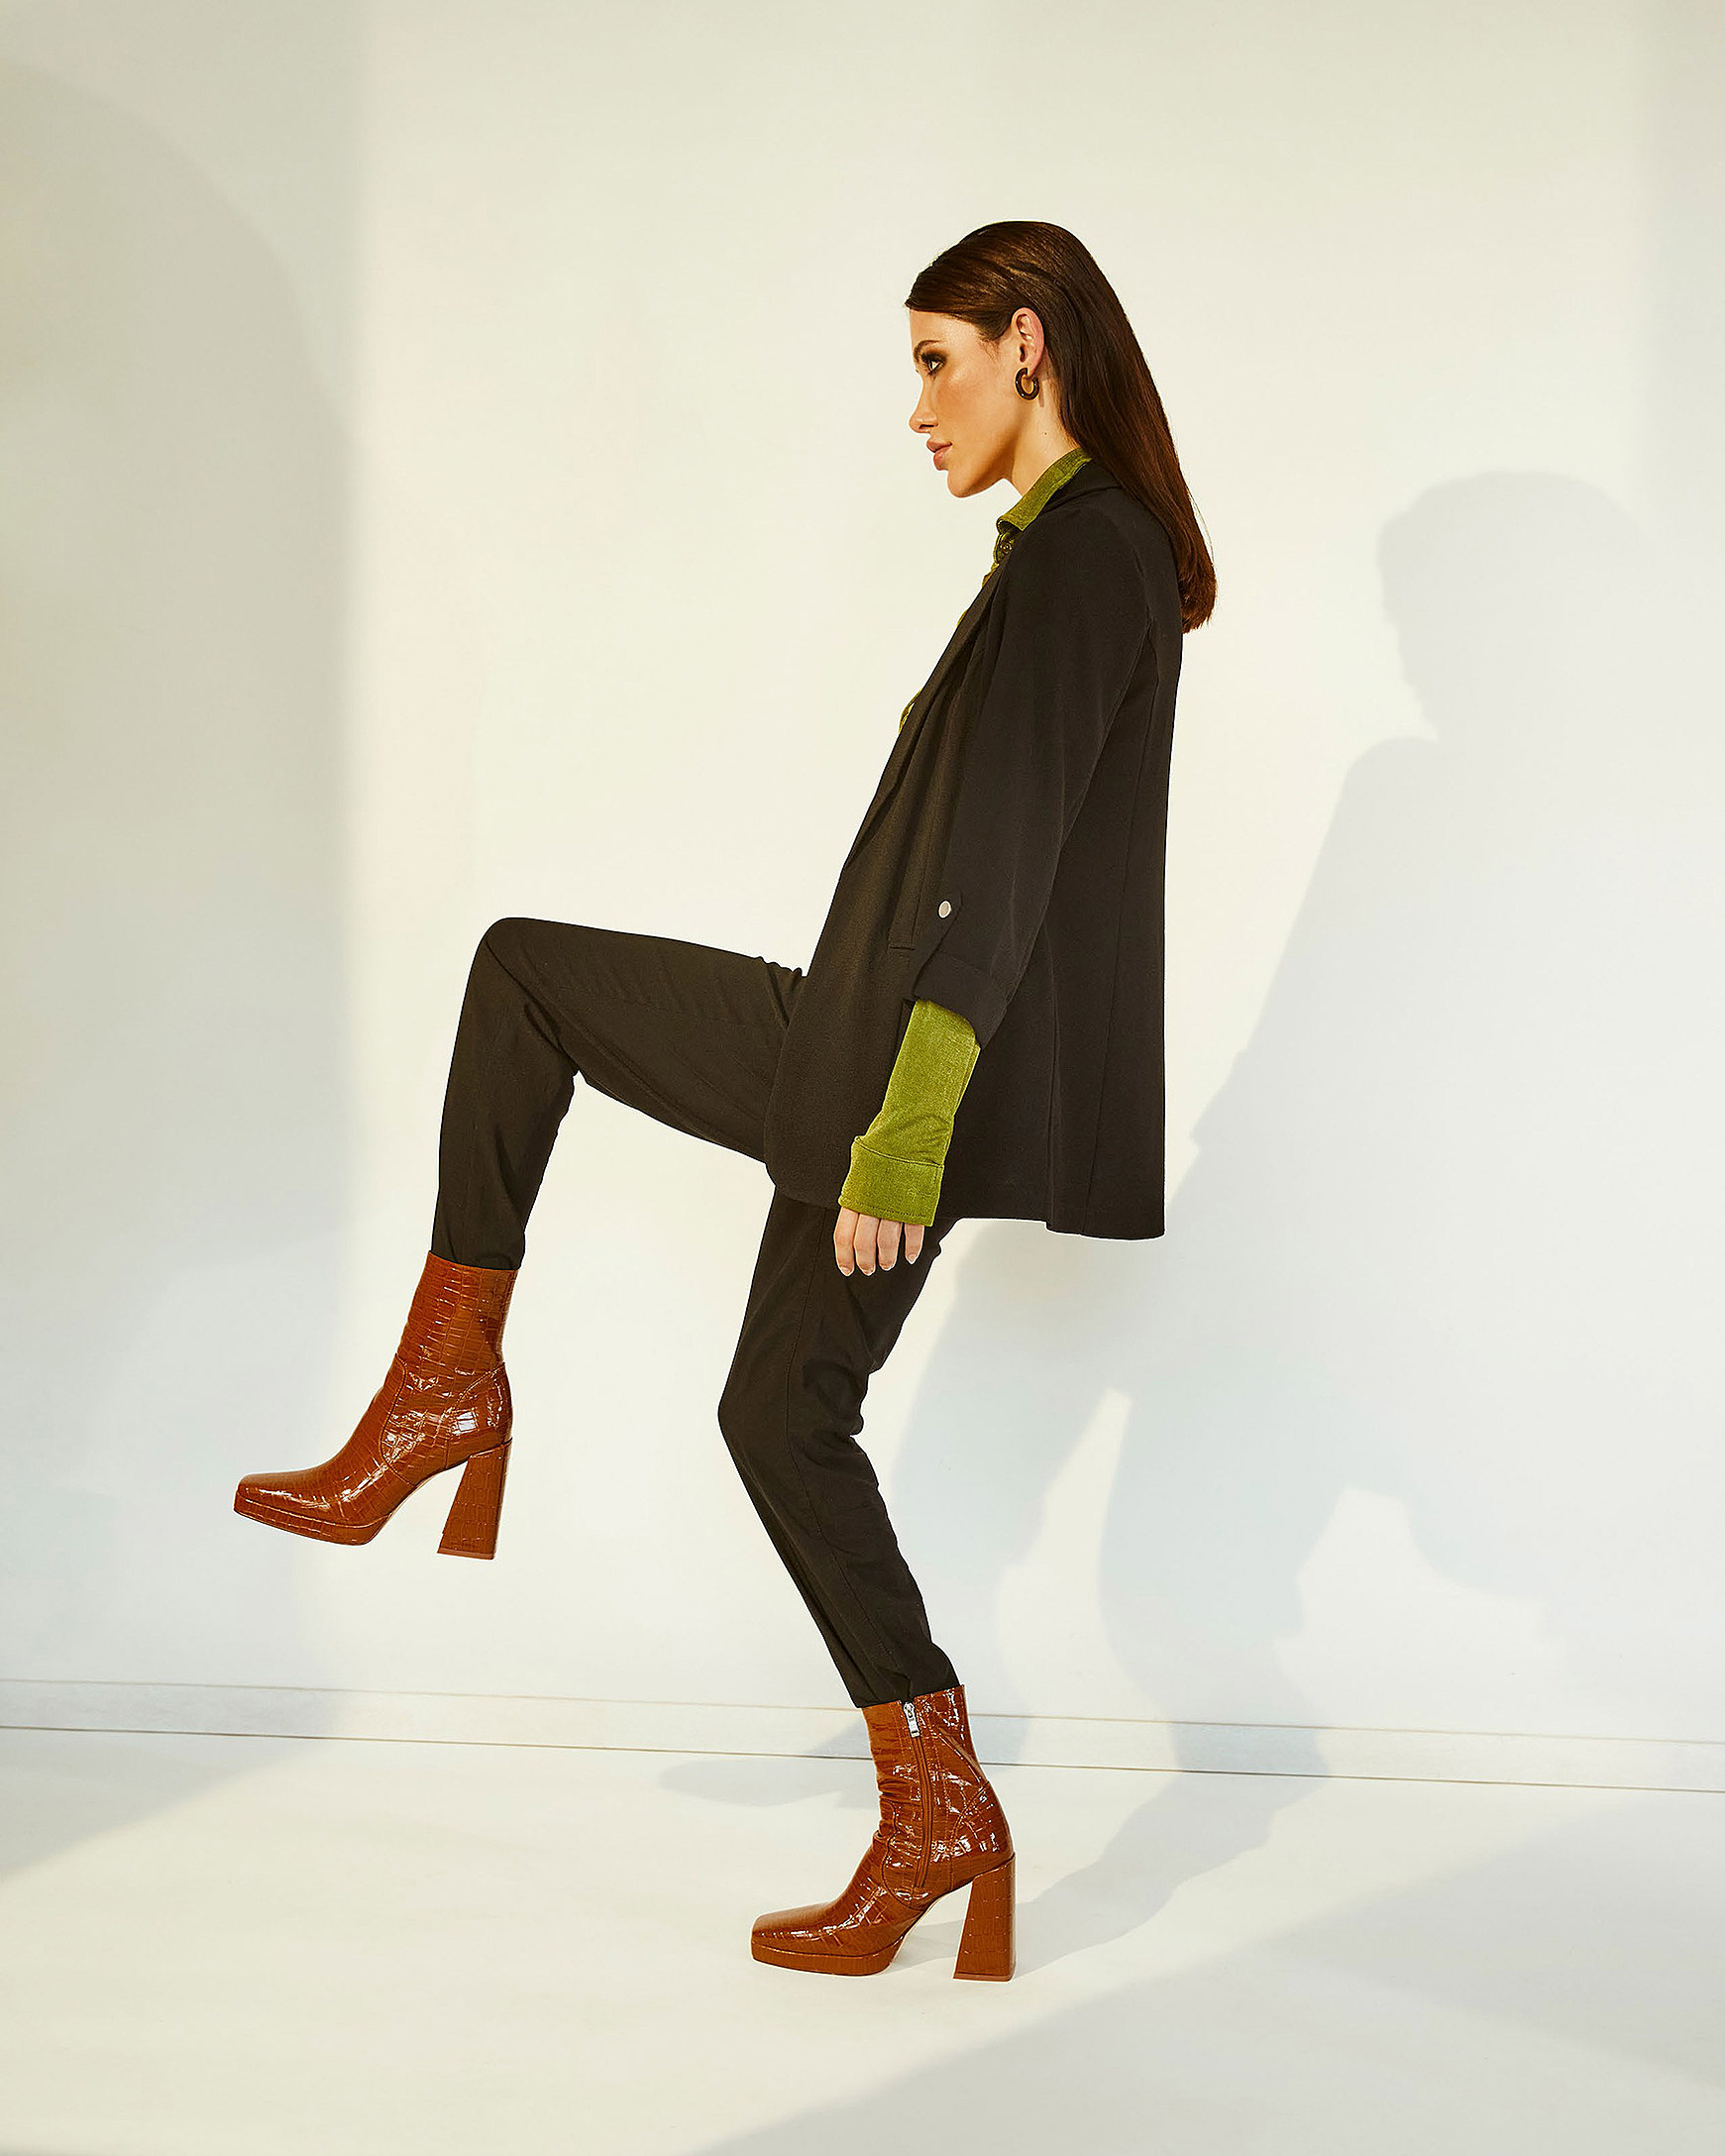 A female model in a green blouse, black jacket and trousers with brown boots